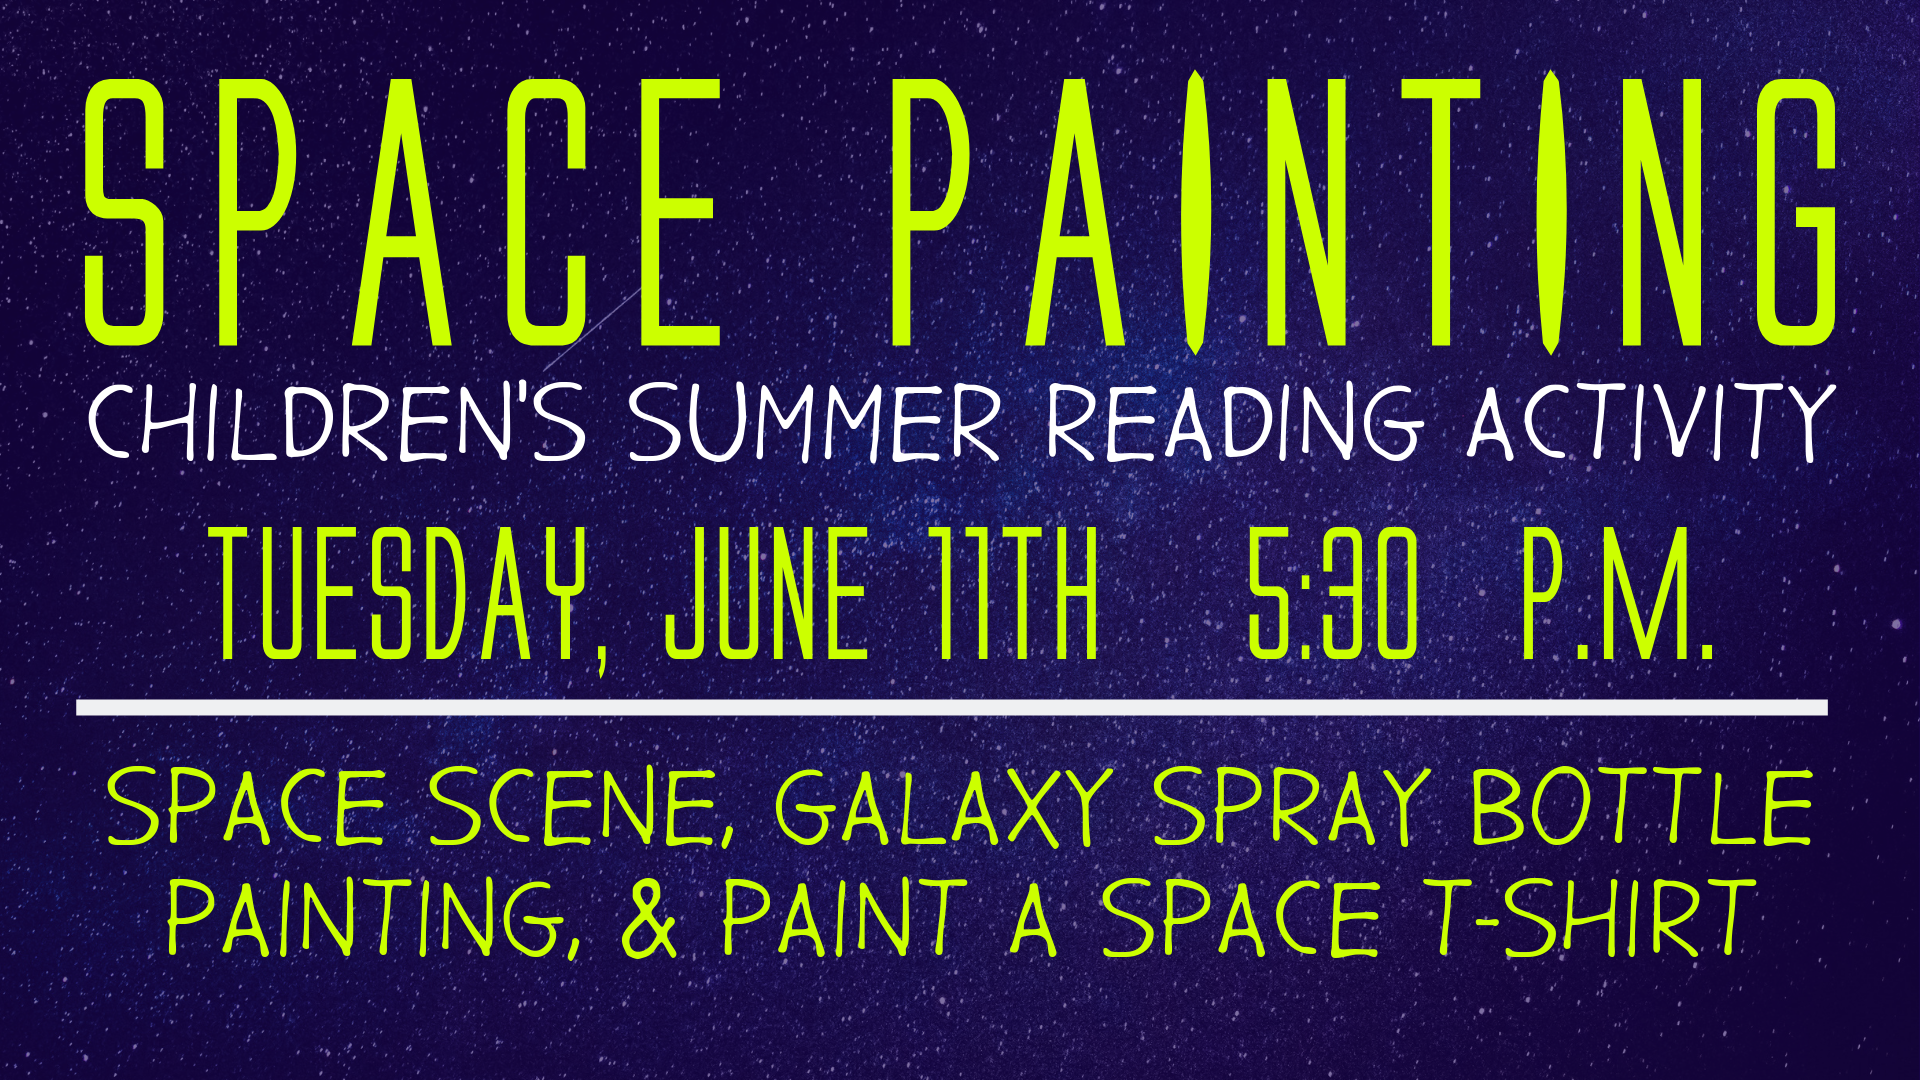 Children's Space Painting Day